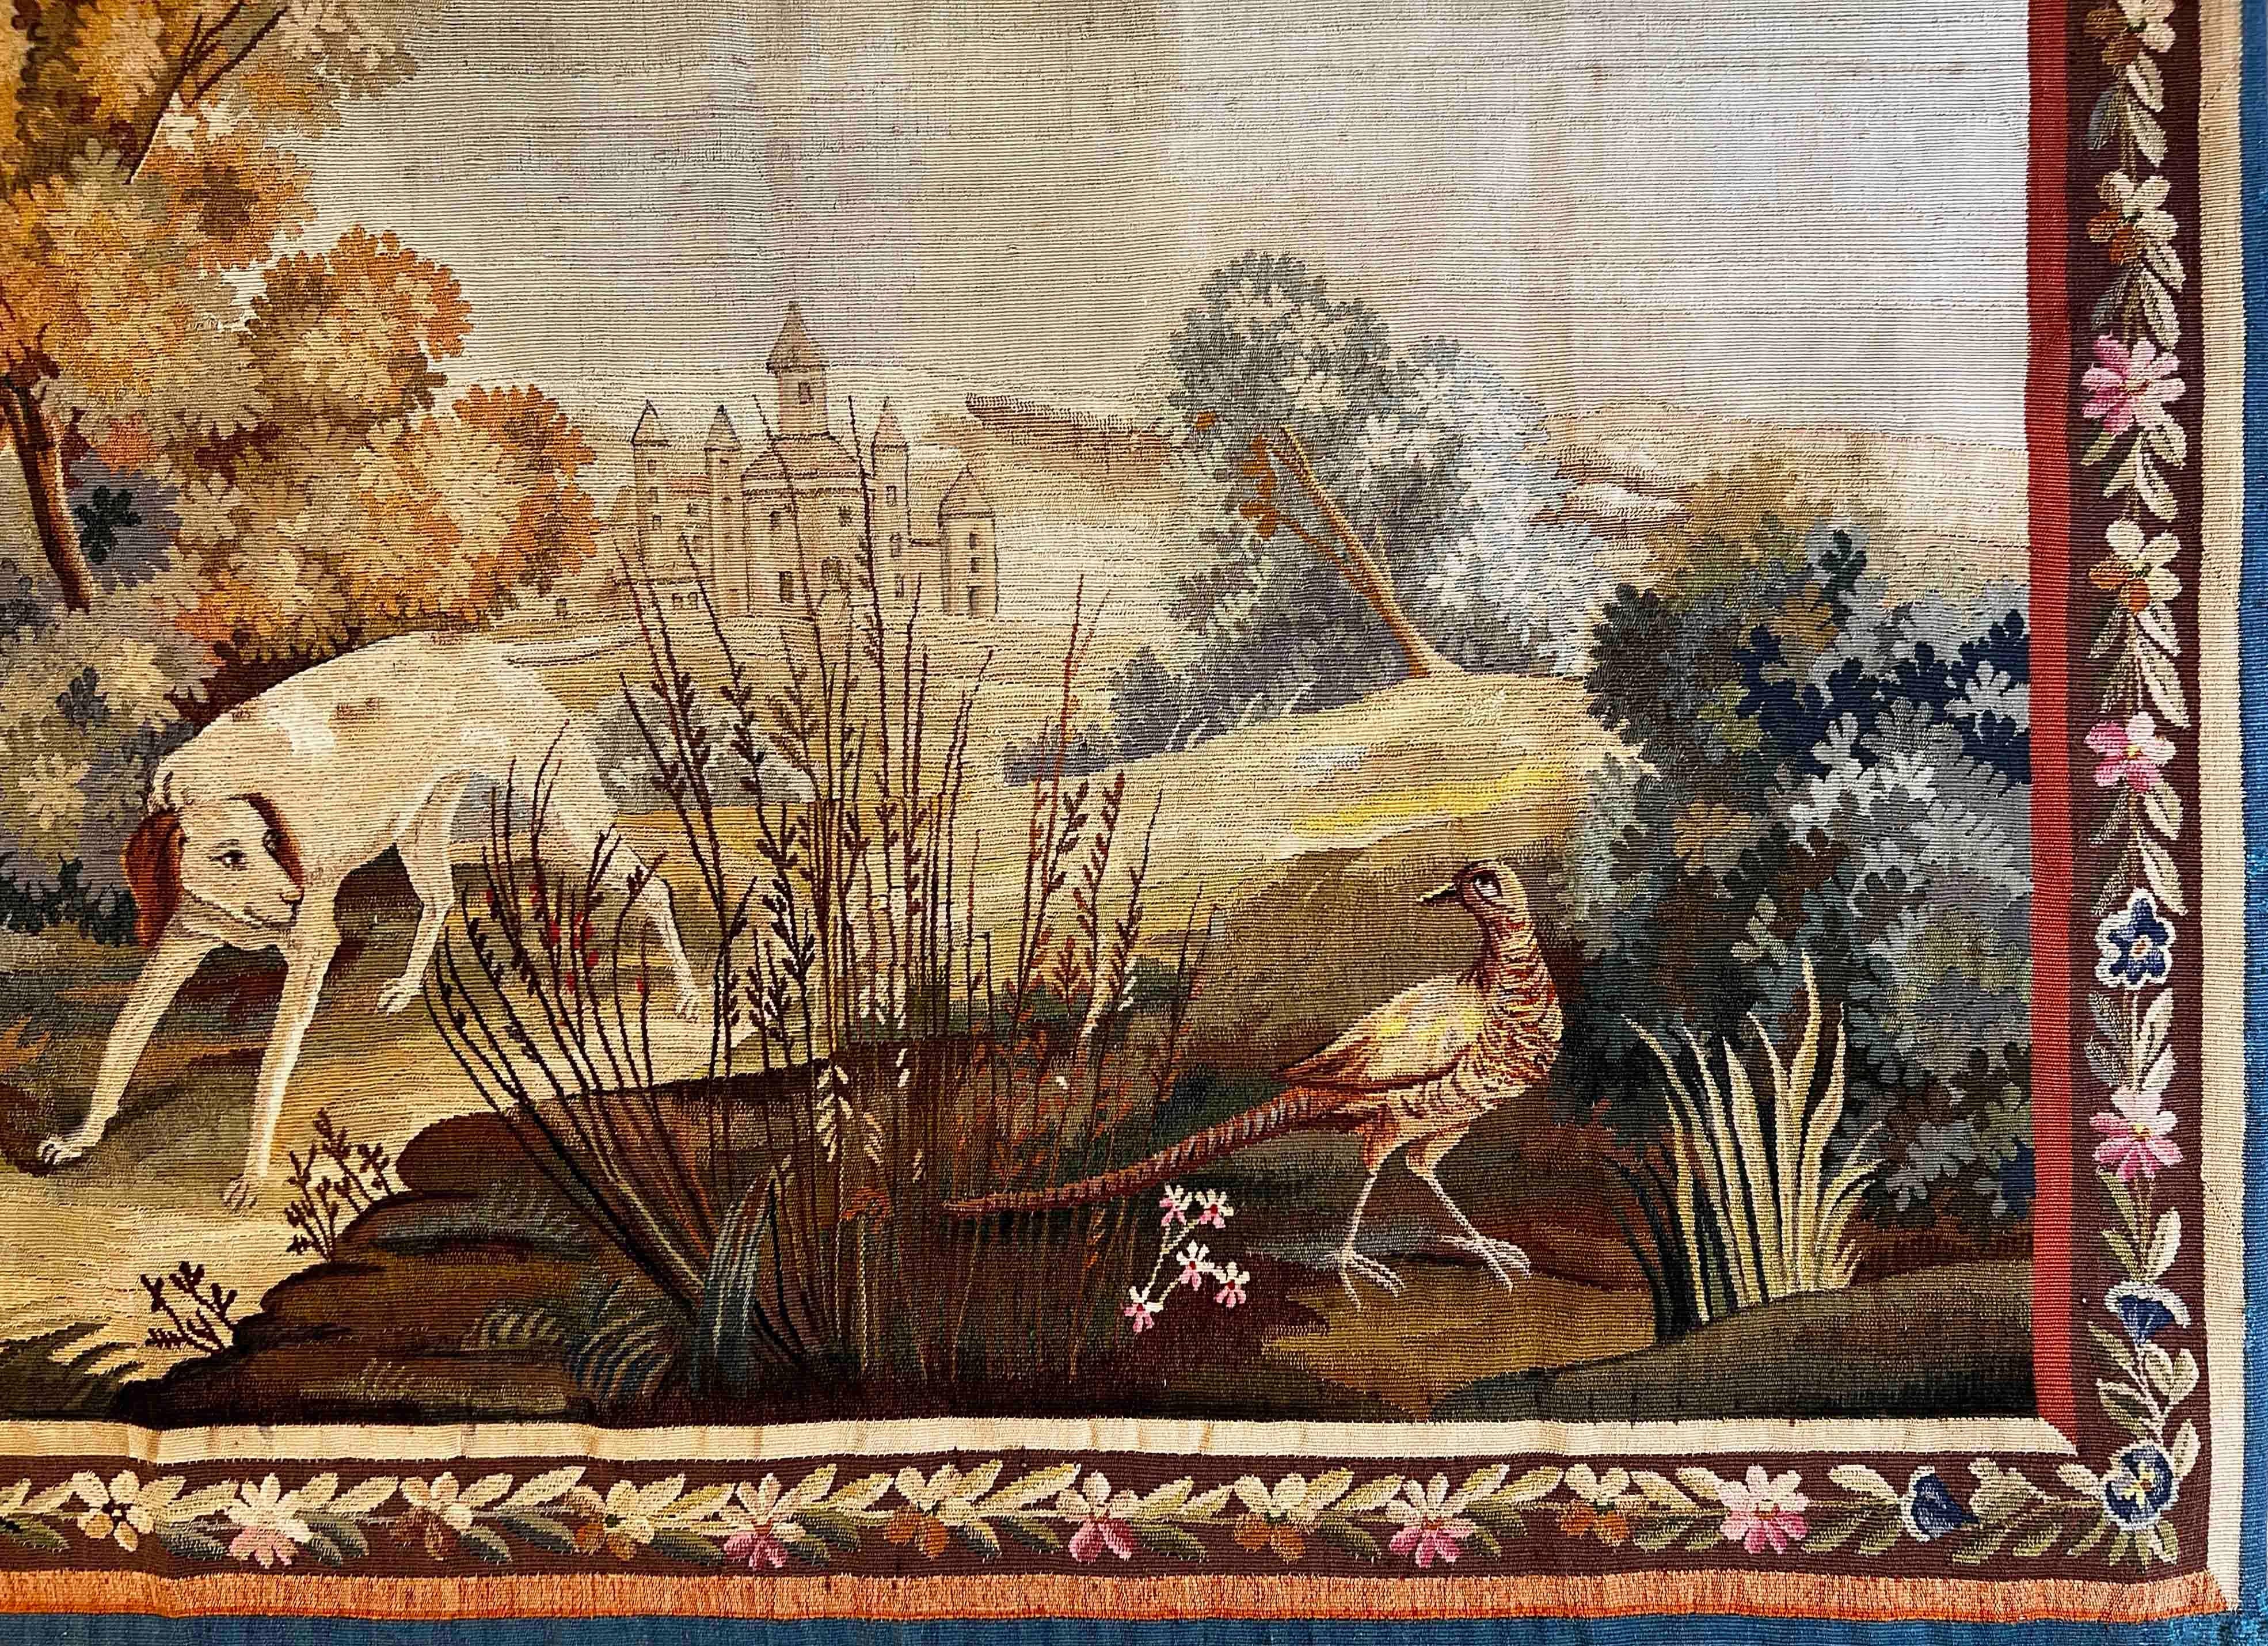 Hand-Woven French Aubusson Tapestry 19th century - N° 1127